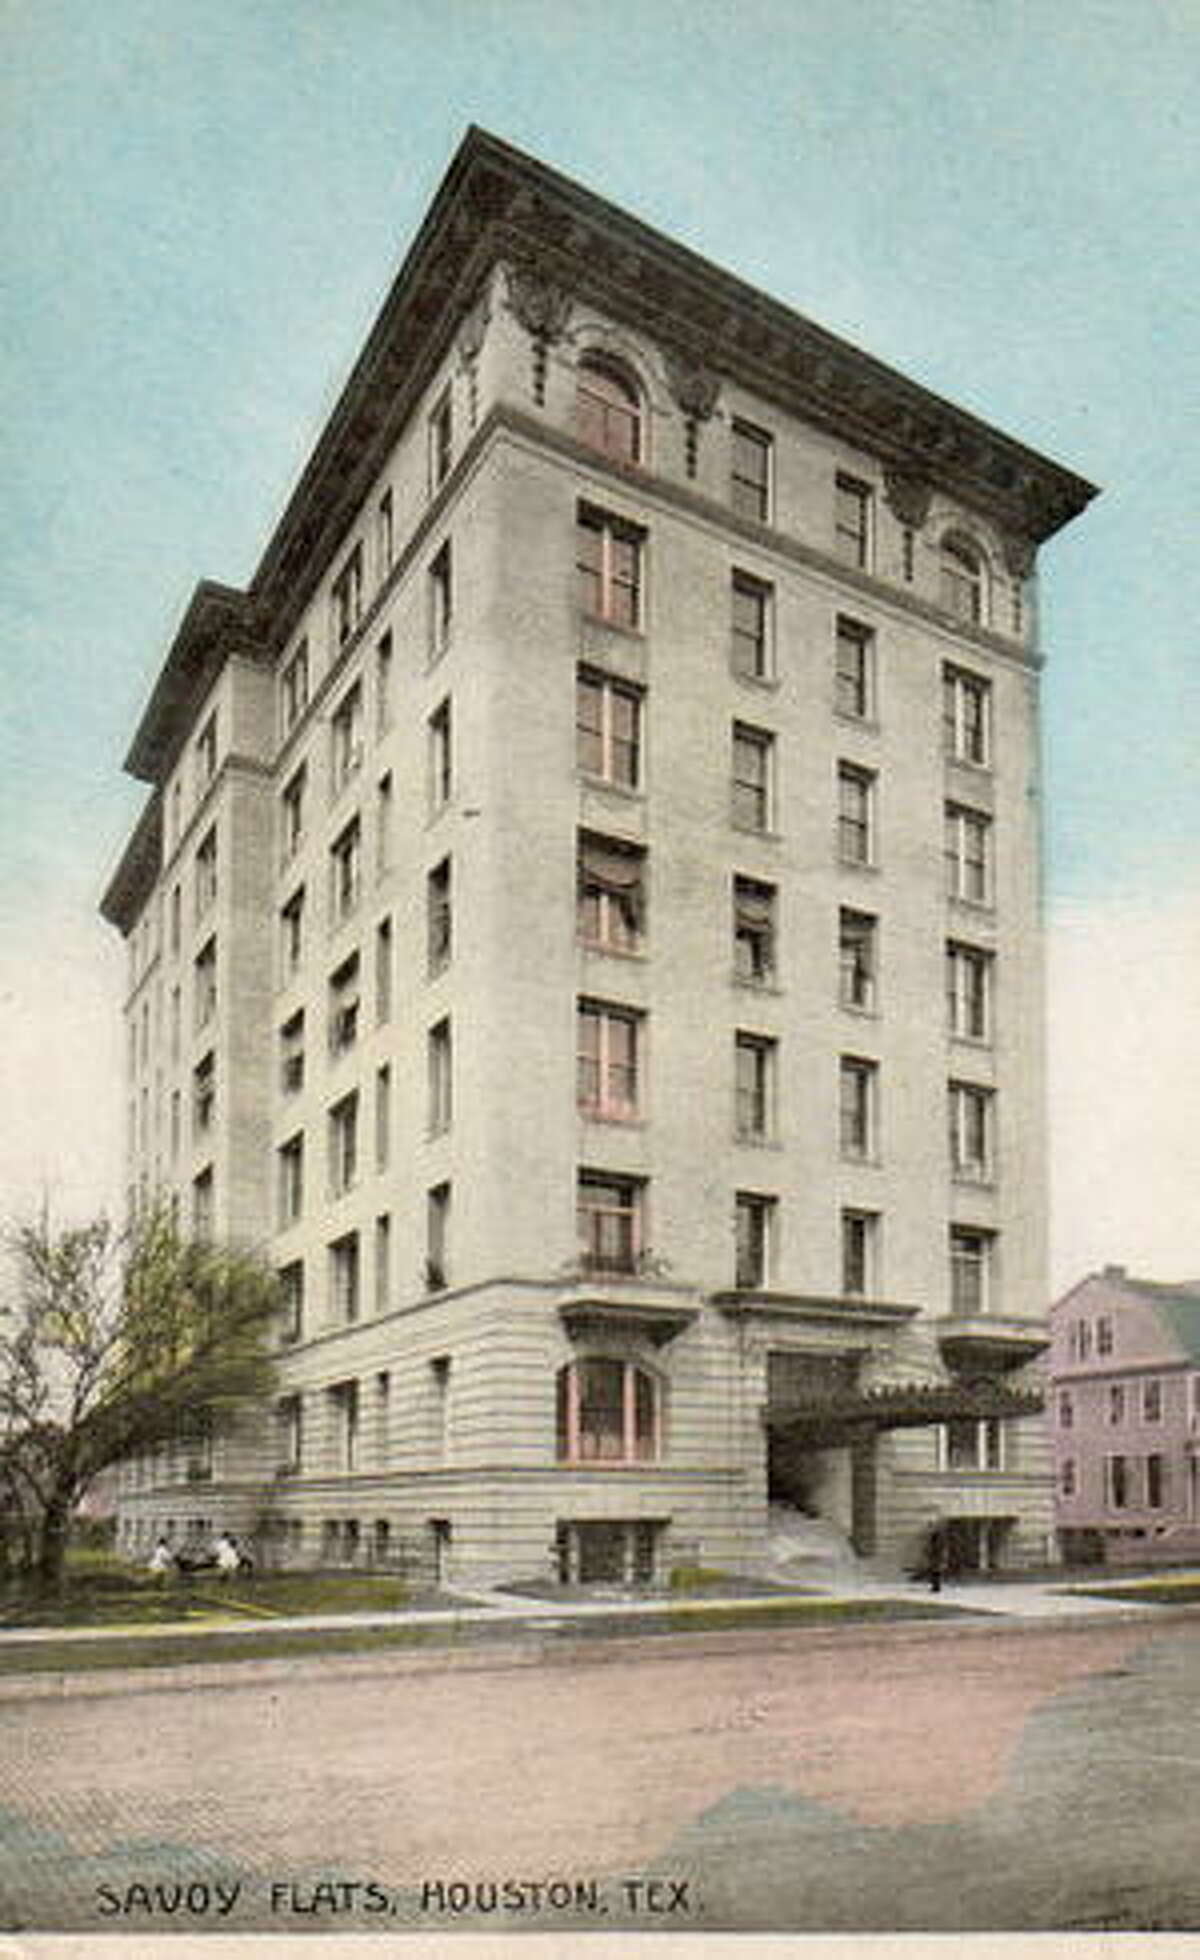 The Savoy Hotel was a 103-year-old building at Main and Pease that was demolished in 2009. It was the first high-rise apartment building in Houston.